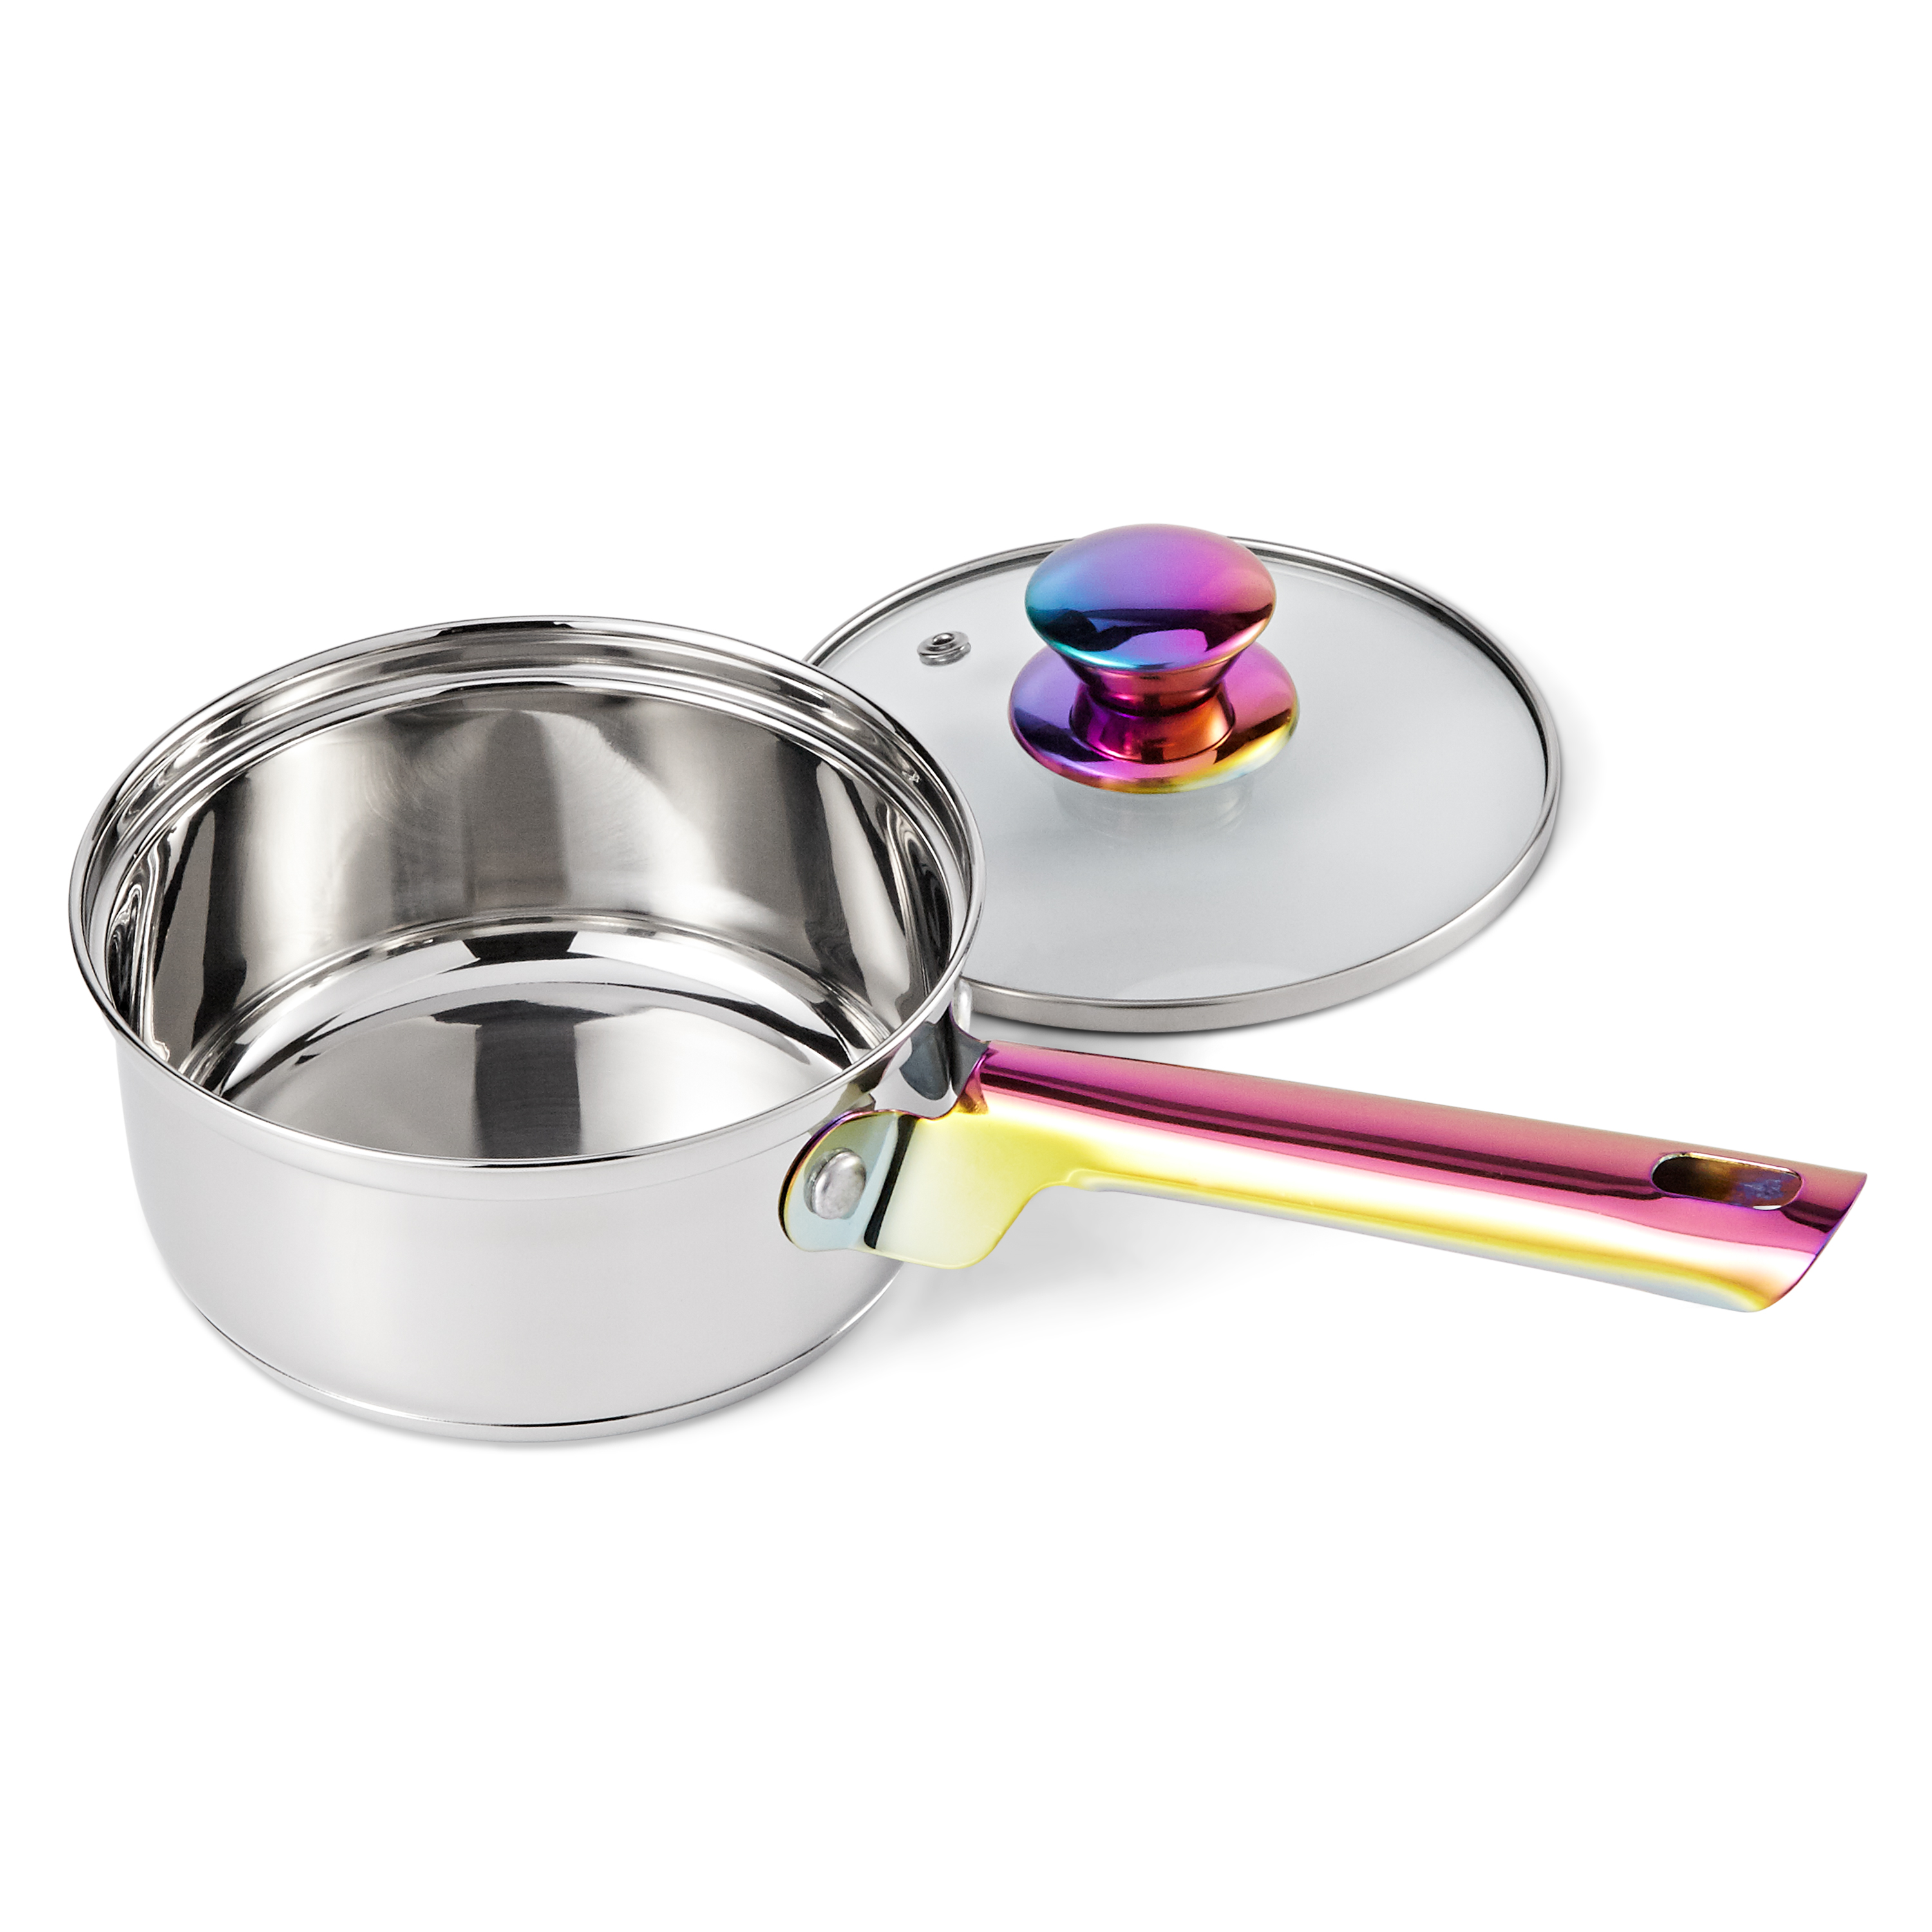 Mainstays Iridescent Stainless Steel 20-Piece Cookware Set, with Kitchen Utensils and Tools - image 2 of 9